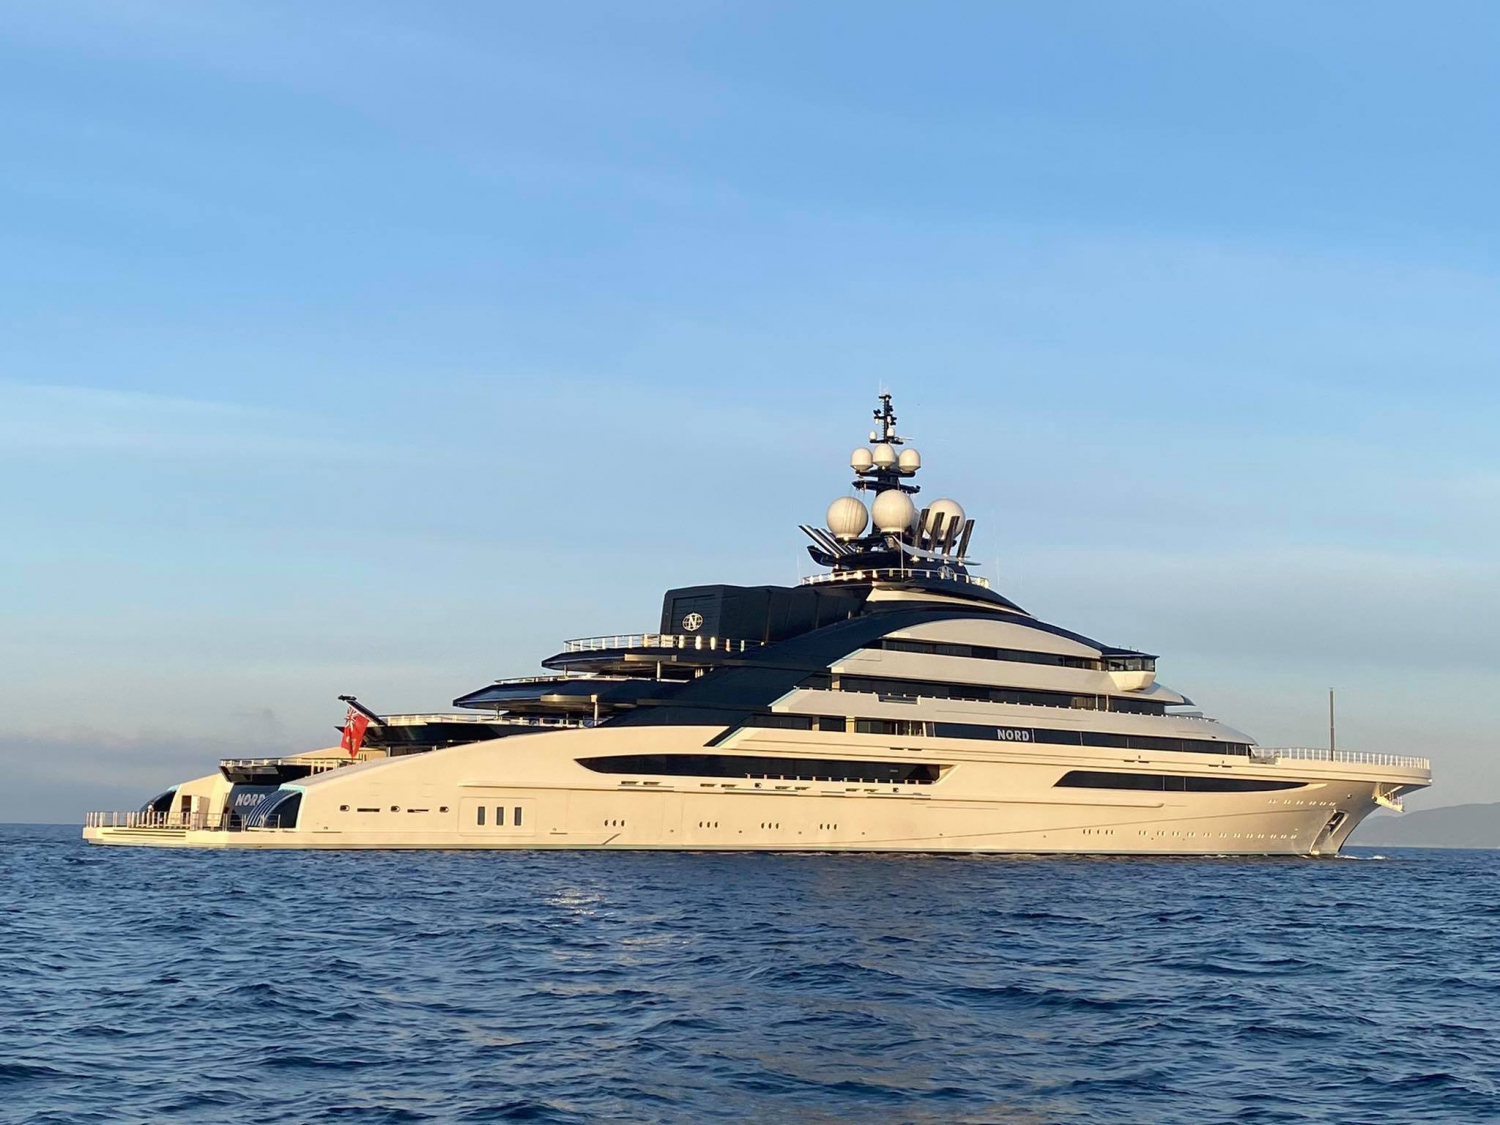 nord yacht owner net worth